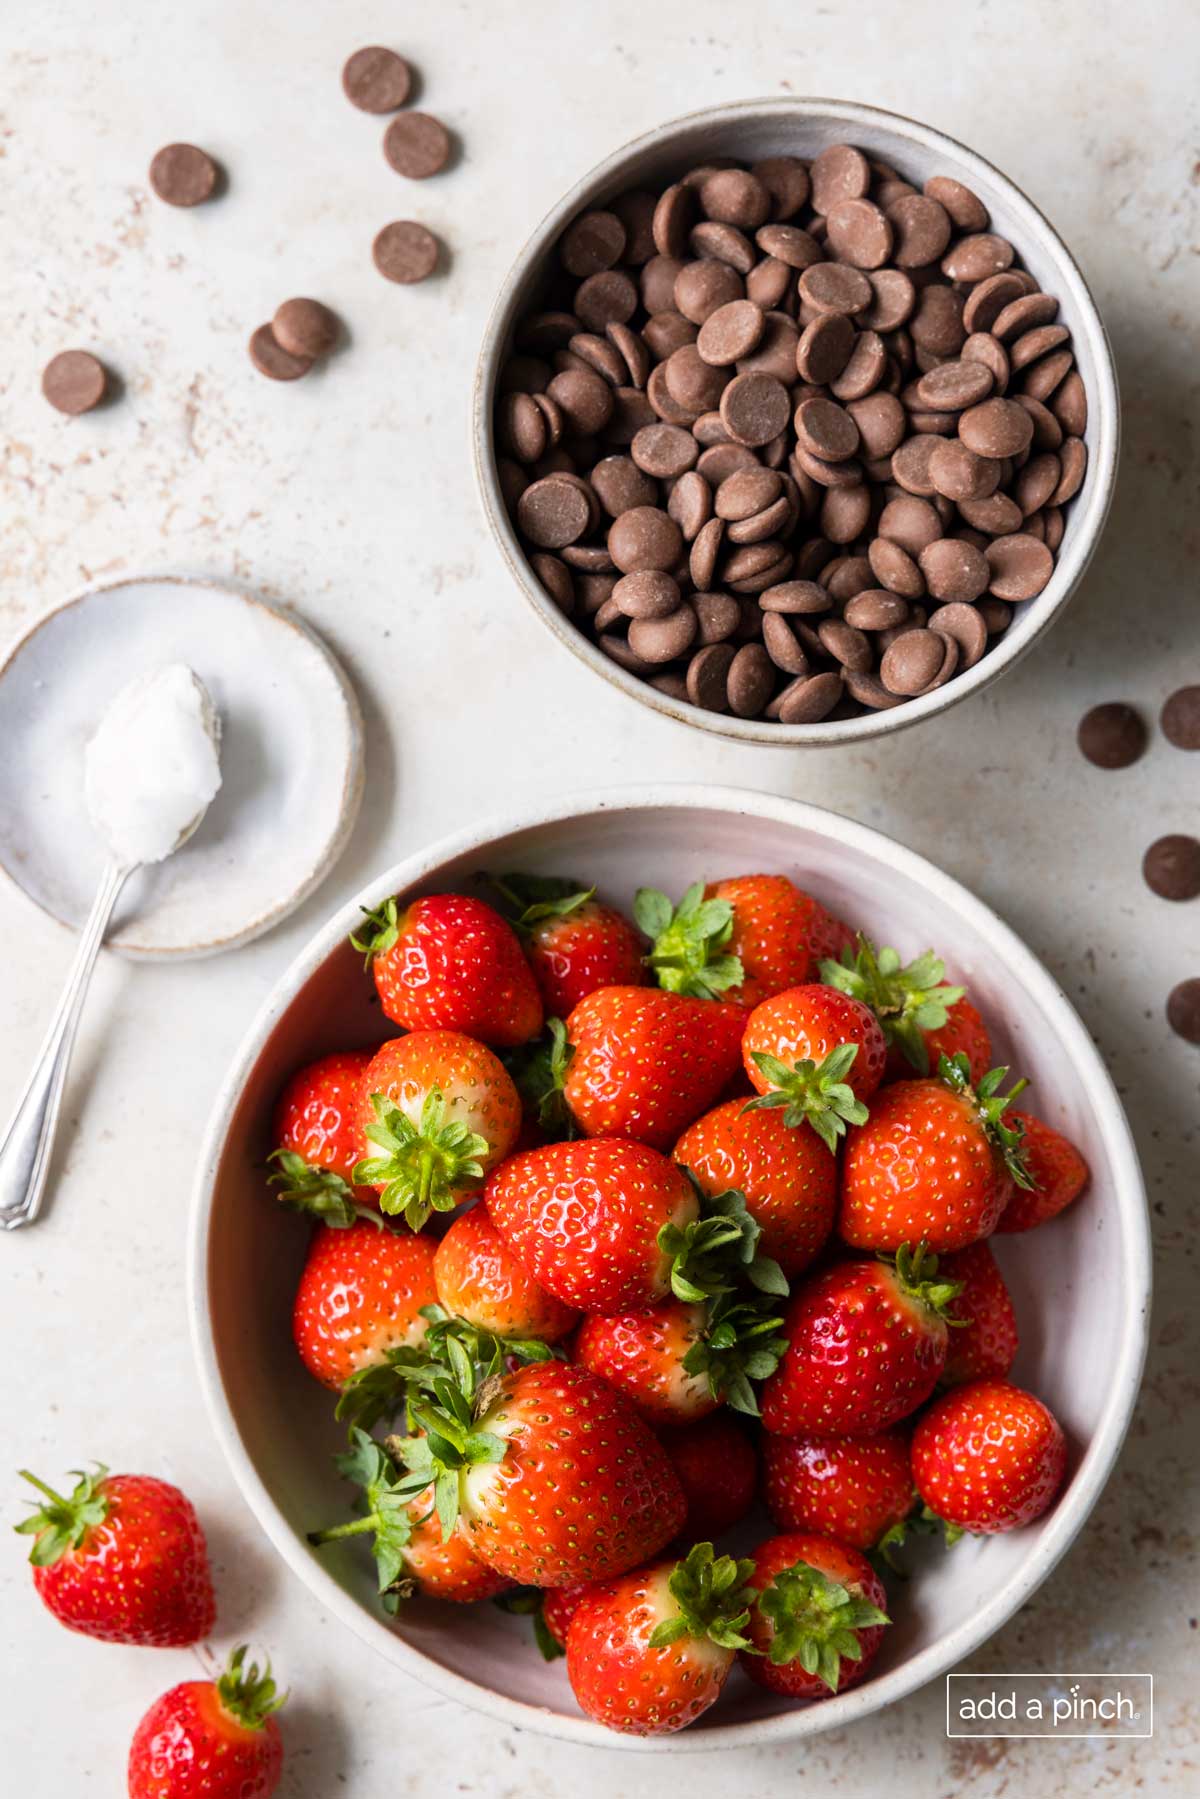 Ingredients to make chocolate covered strawberries: chocolate chips , coconut oil, and ripe strawberries in a bowl. 